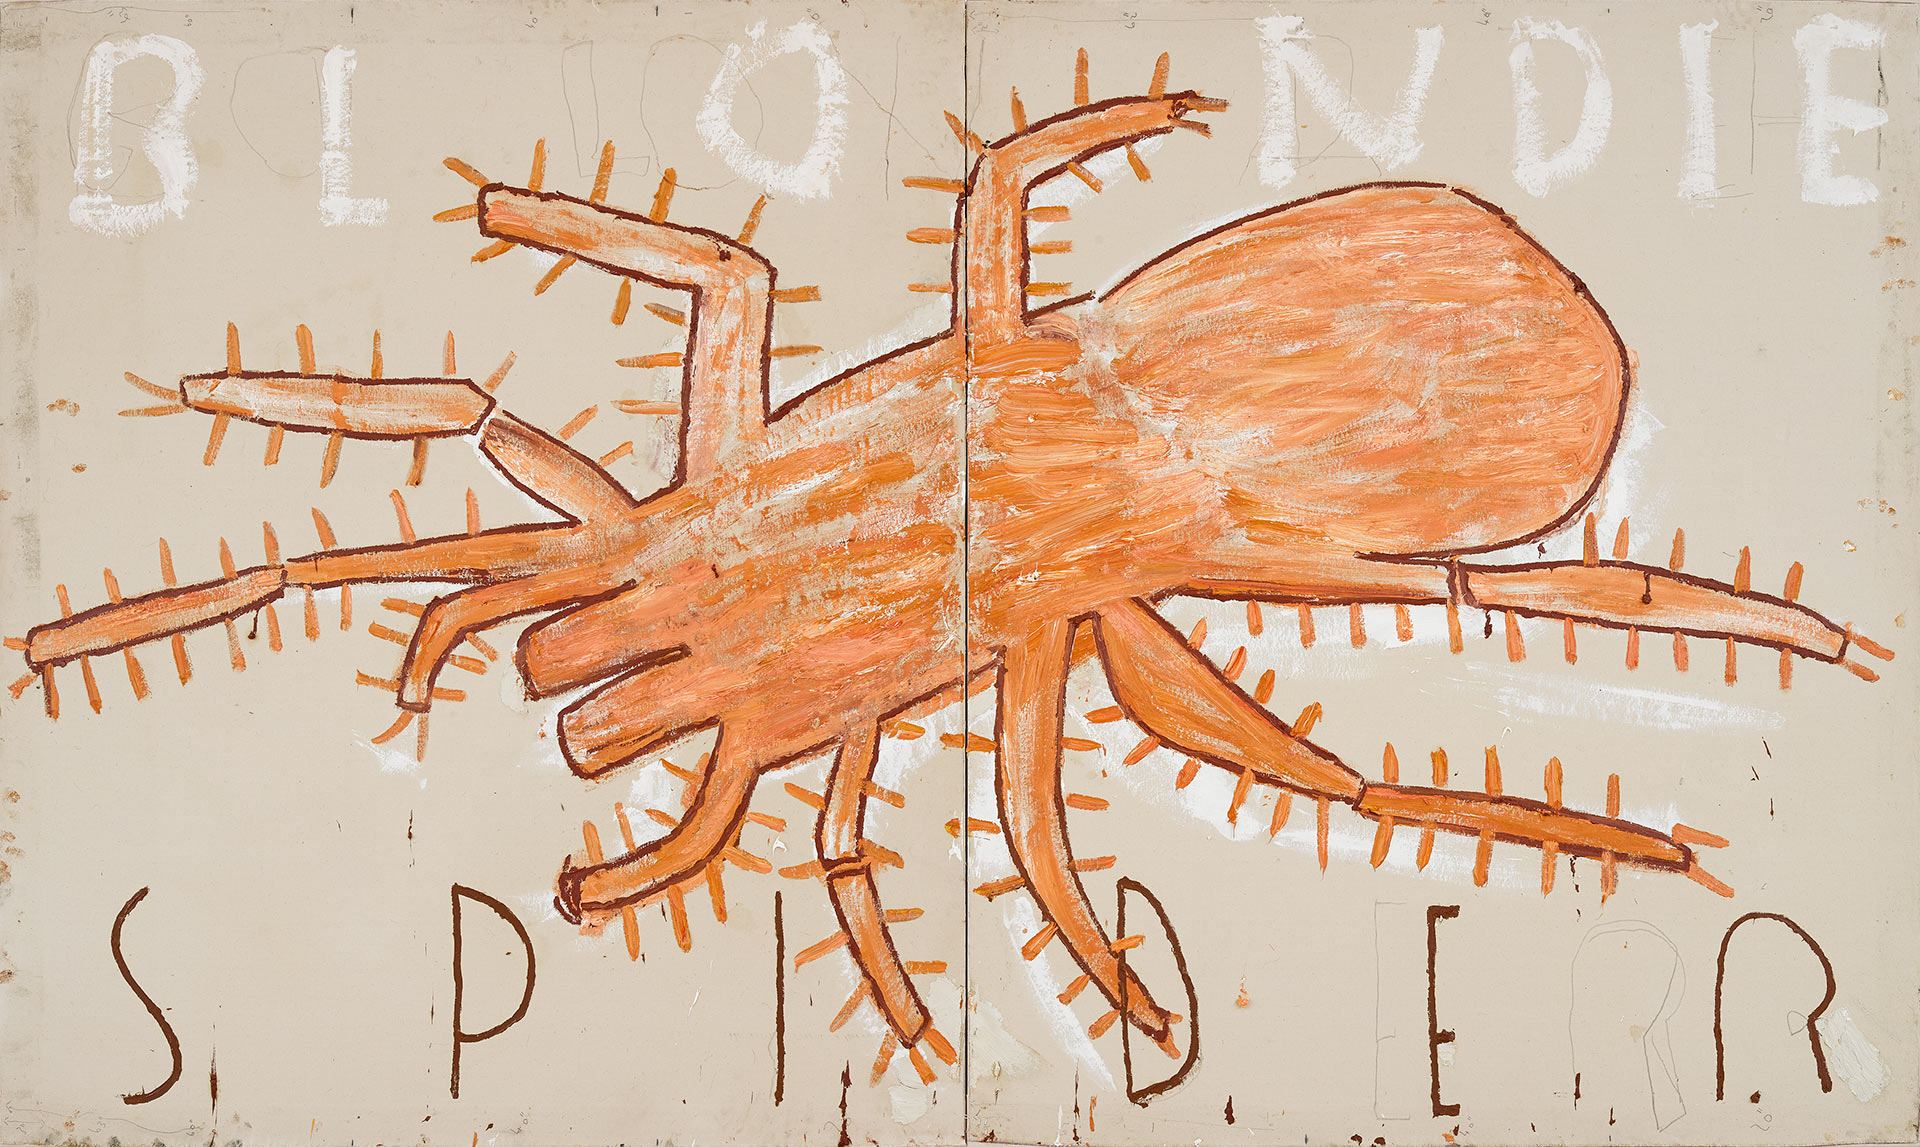 A painting by Rose Wylie, titled Spider, dated 2019.